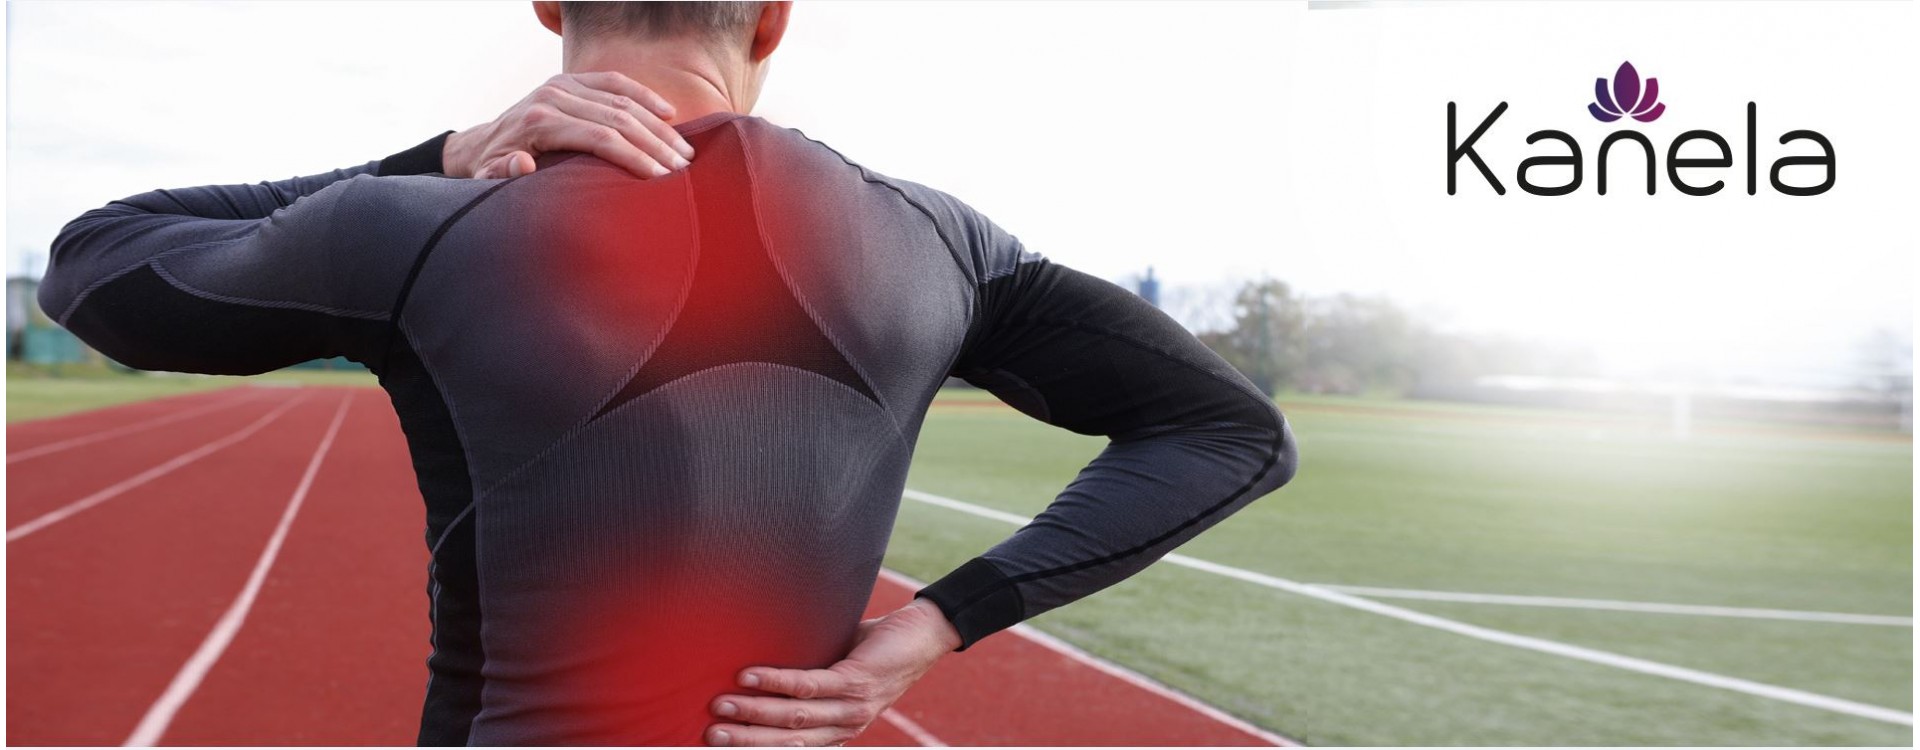 How do you get rid of sore muscles quickly?